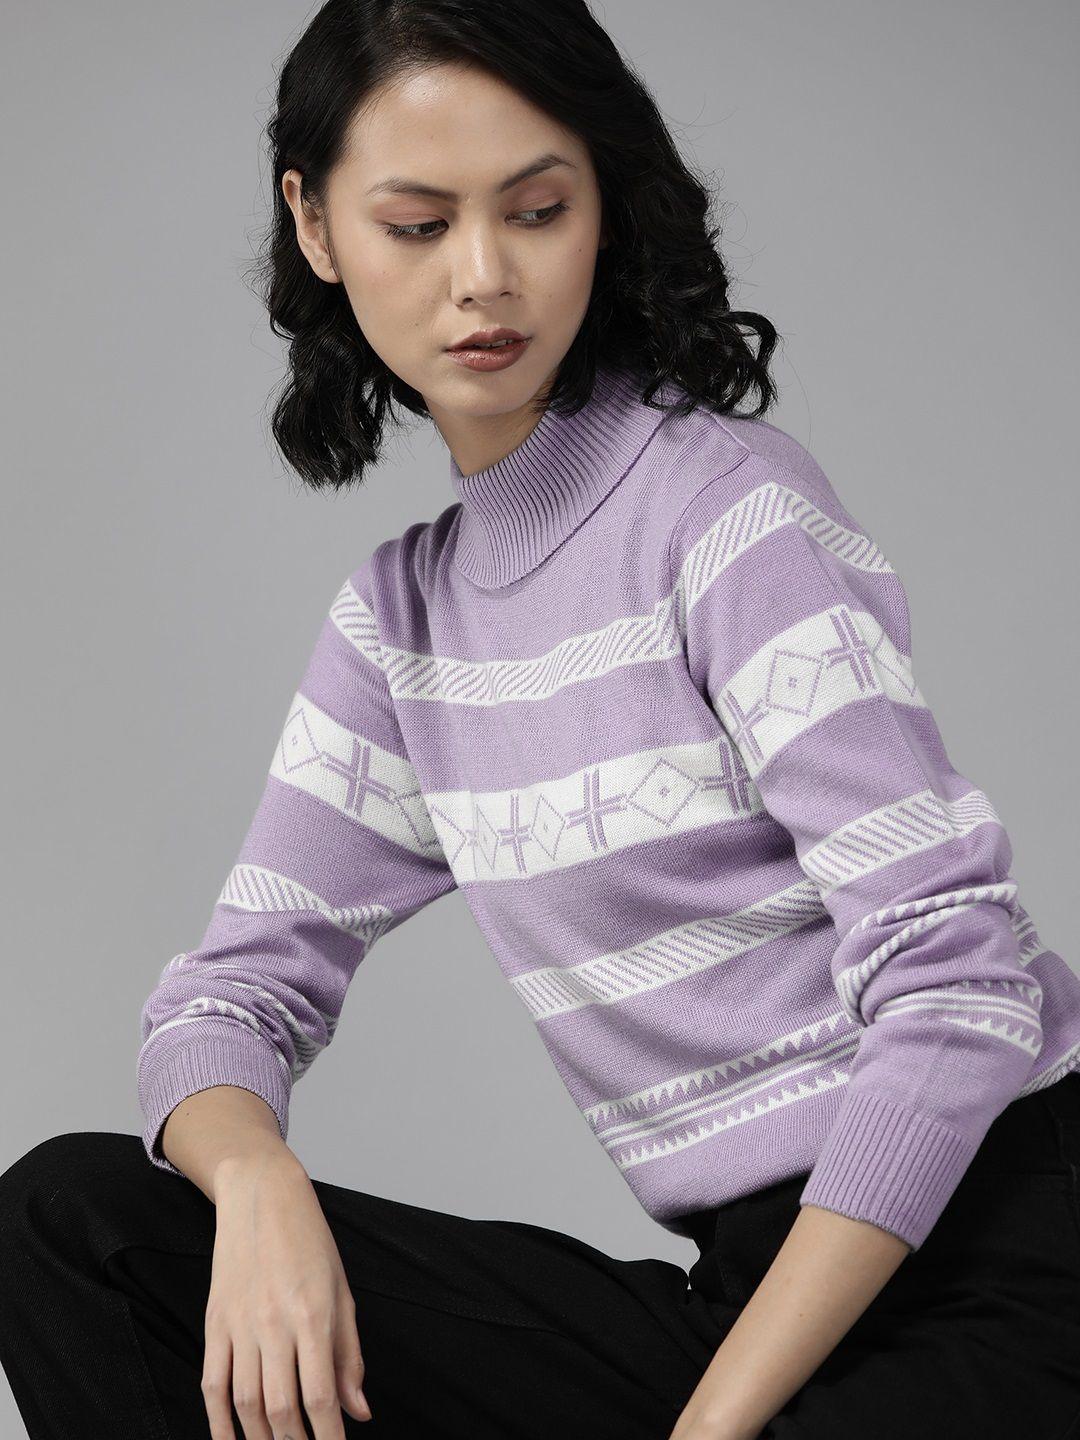 the roadster lifestyle co. women lavender & white striped sweater